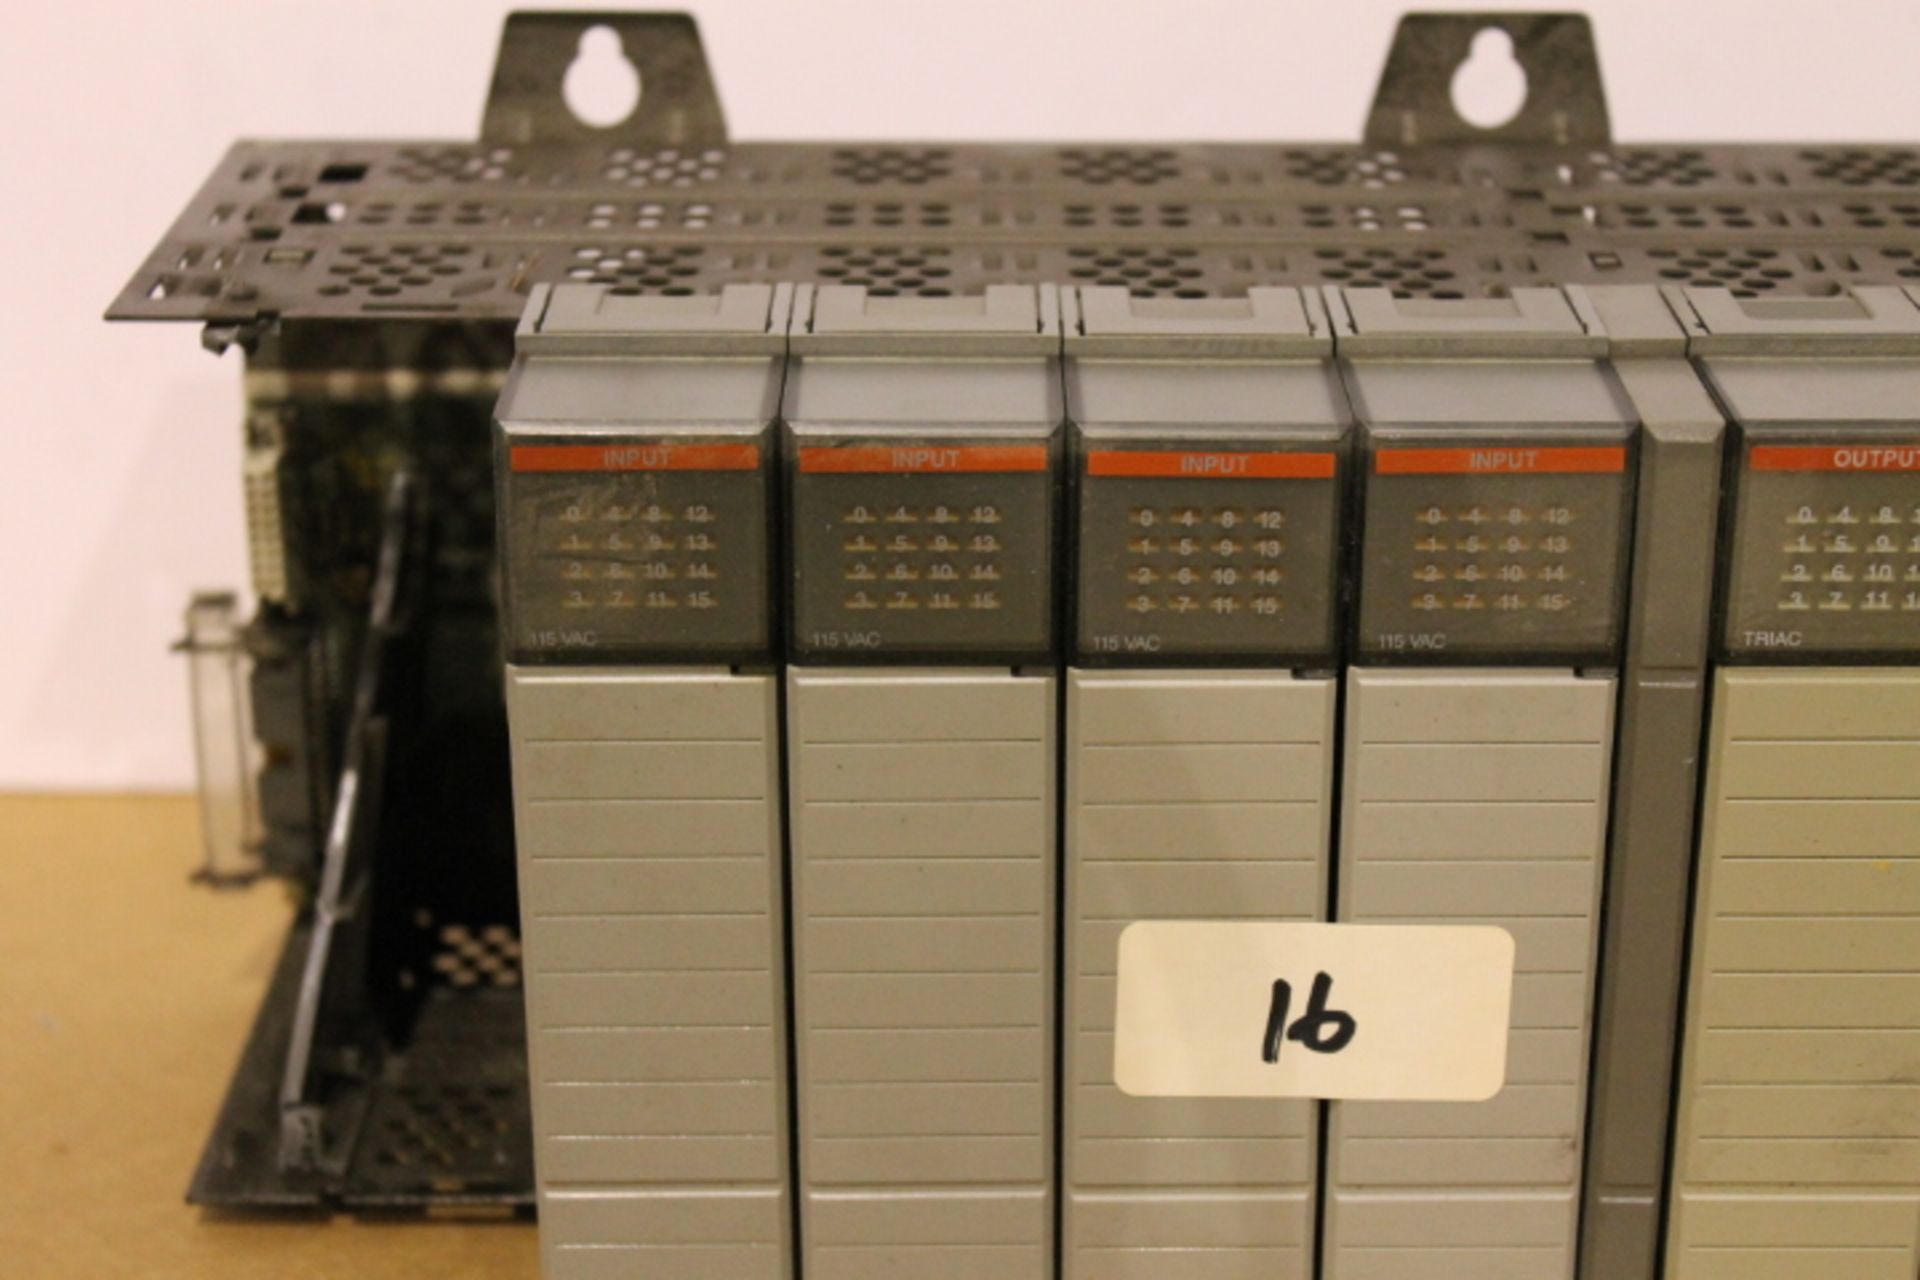 ALLEN-BRADLEY SLC 500 RACK W/ VARIOUS CARDS (SEE PICTURES) - Image 2 of 4